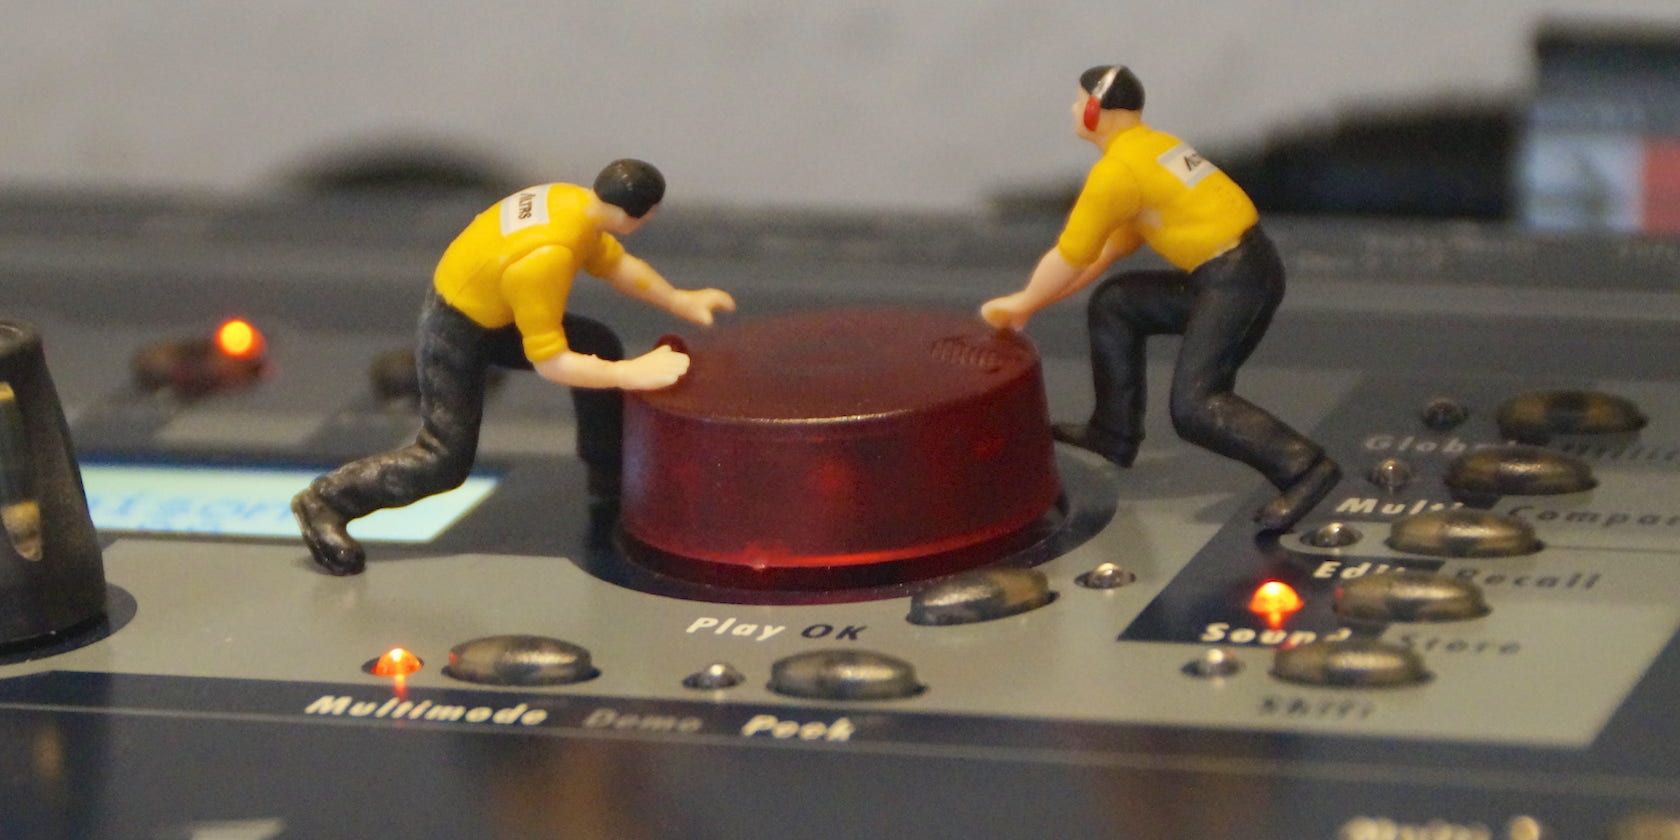 Close-up photo of two minature human figurines turning a knob on a synthesizer